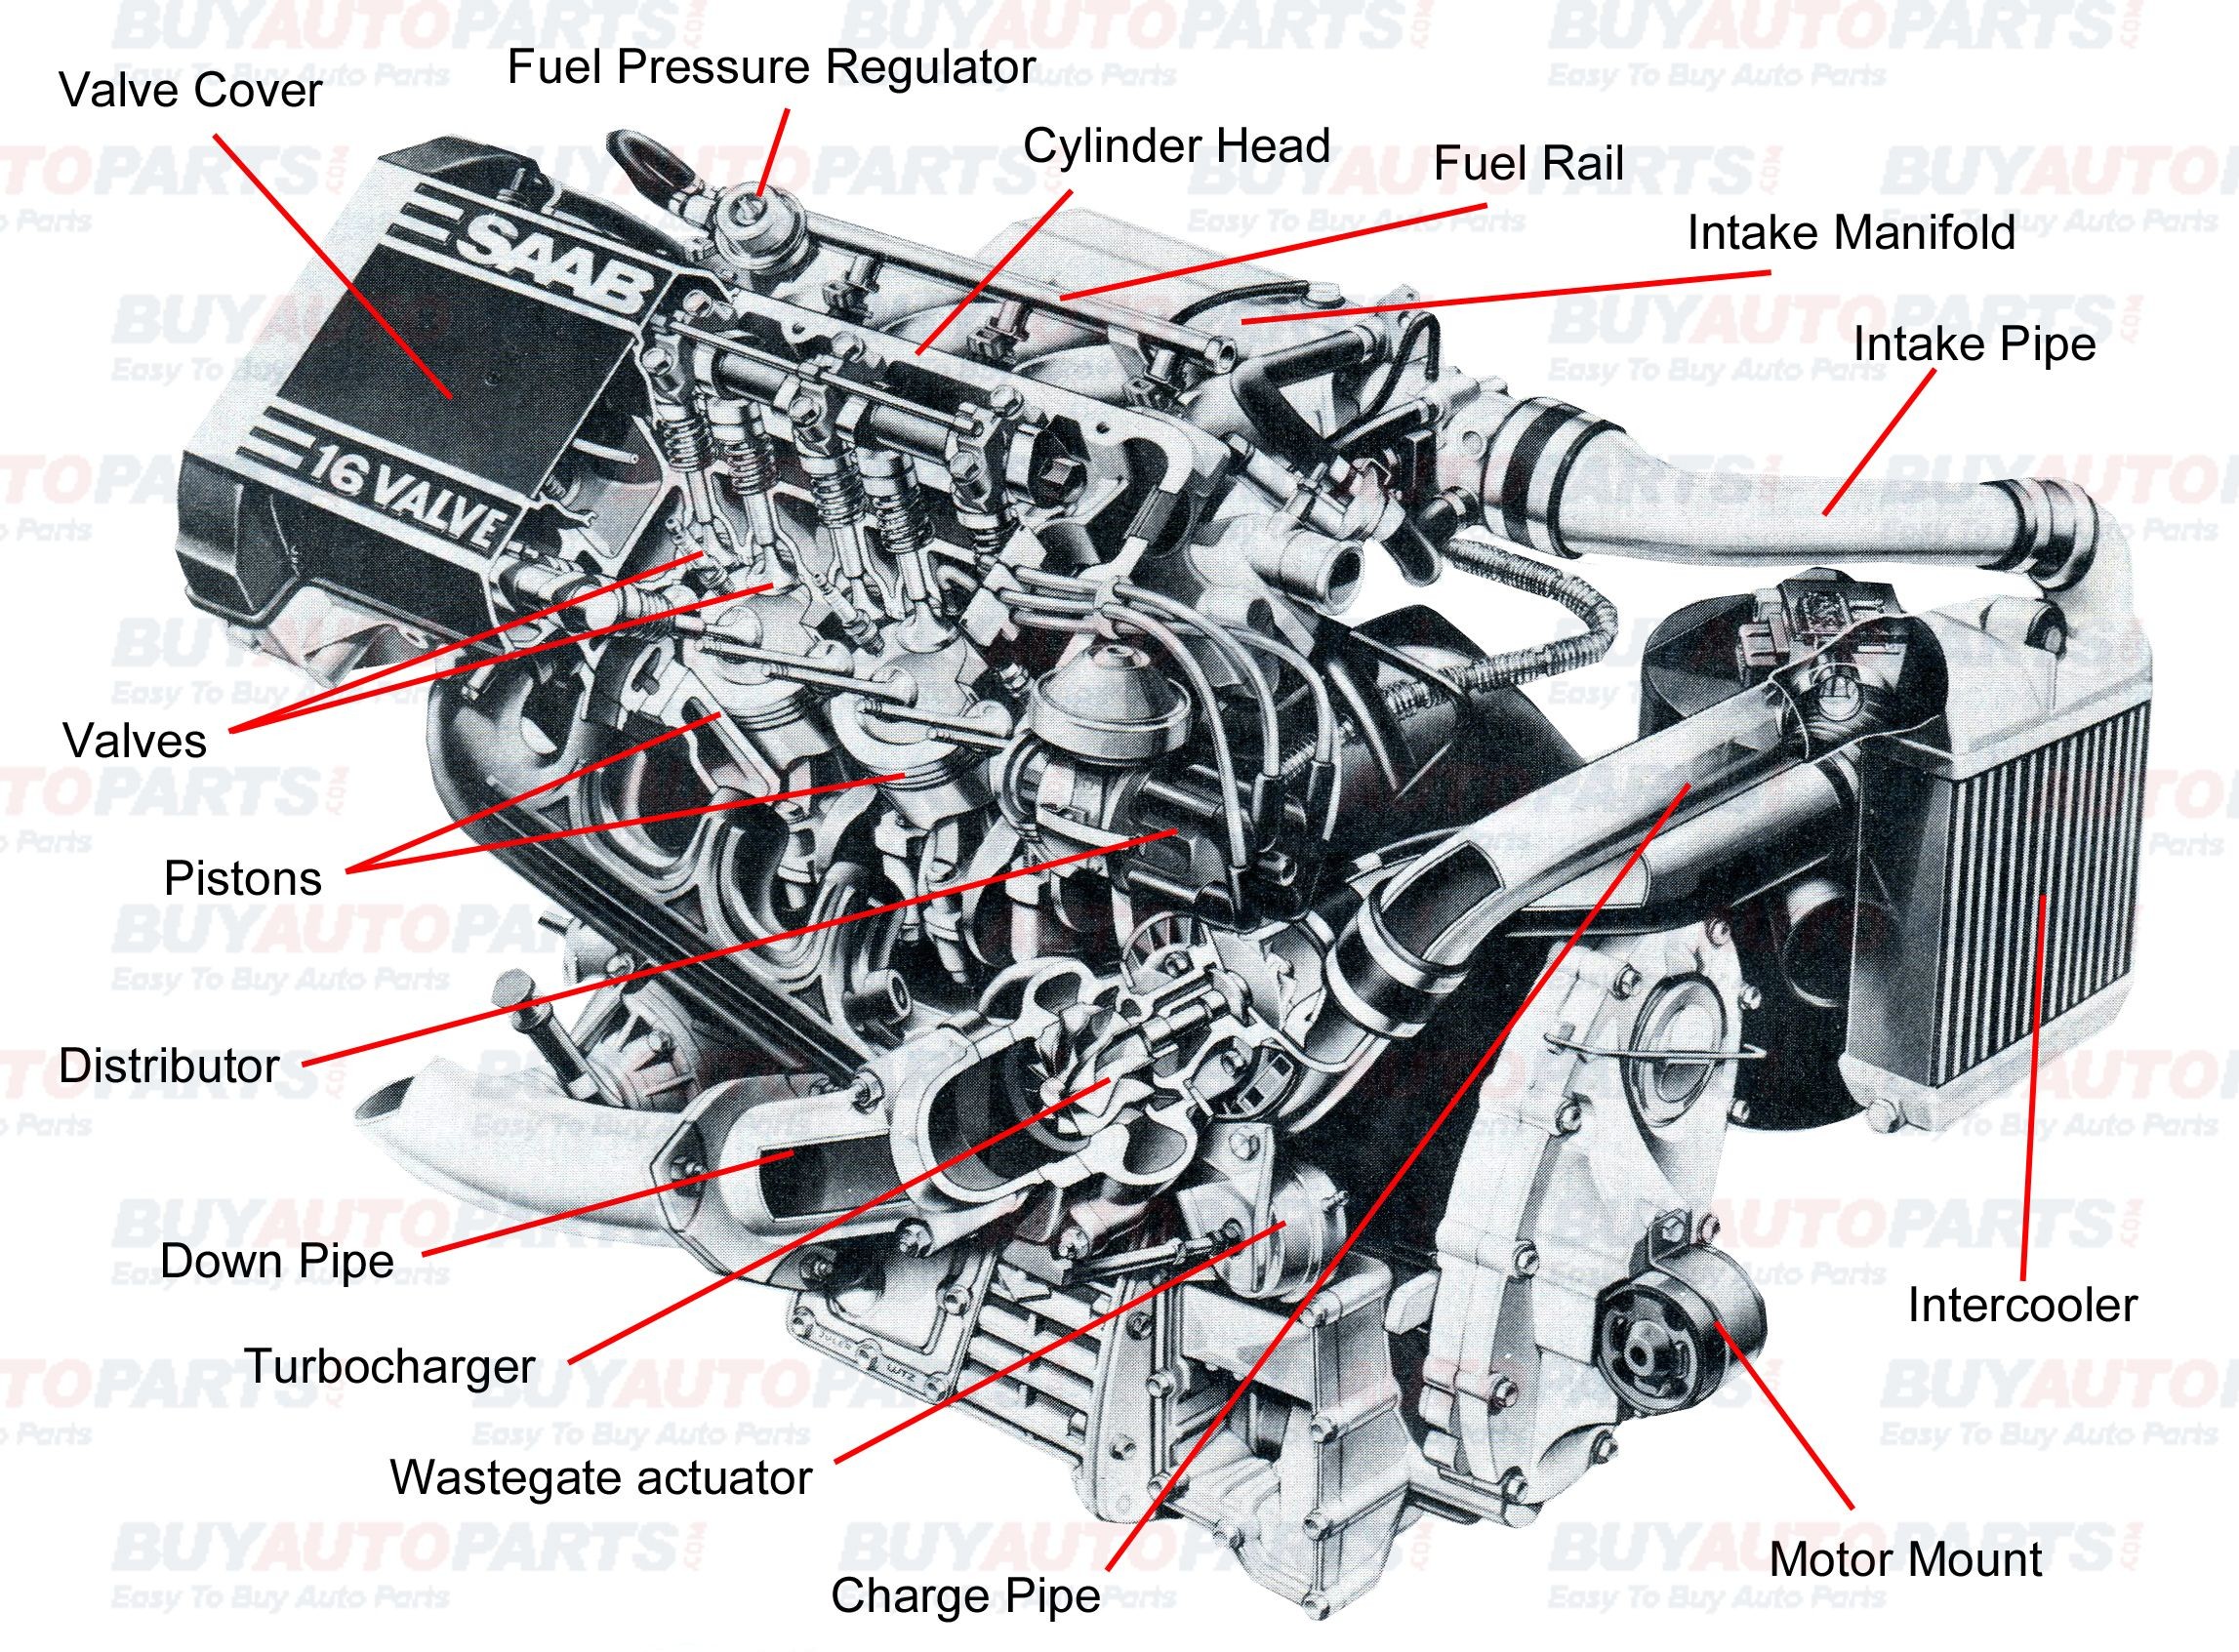 Parts Of A Car Engine Diagram Pin by Jimmiejanet Testellamwfz On What Does An Engine with Turbo Of Parts Of A Car Engine Diagram